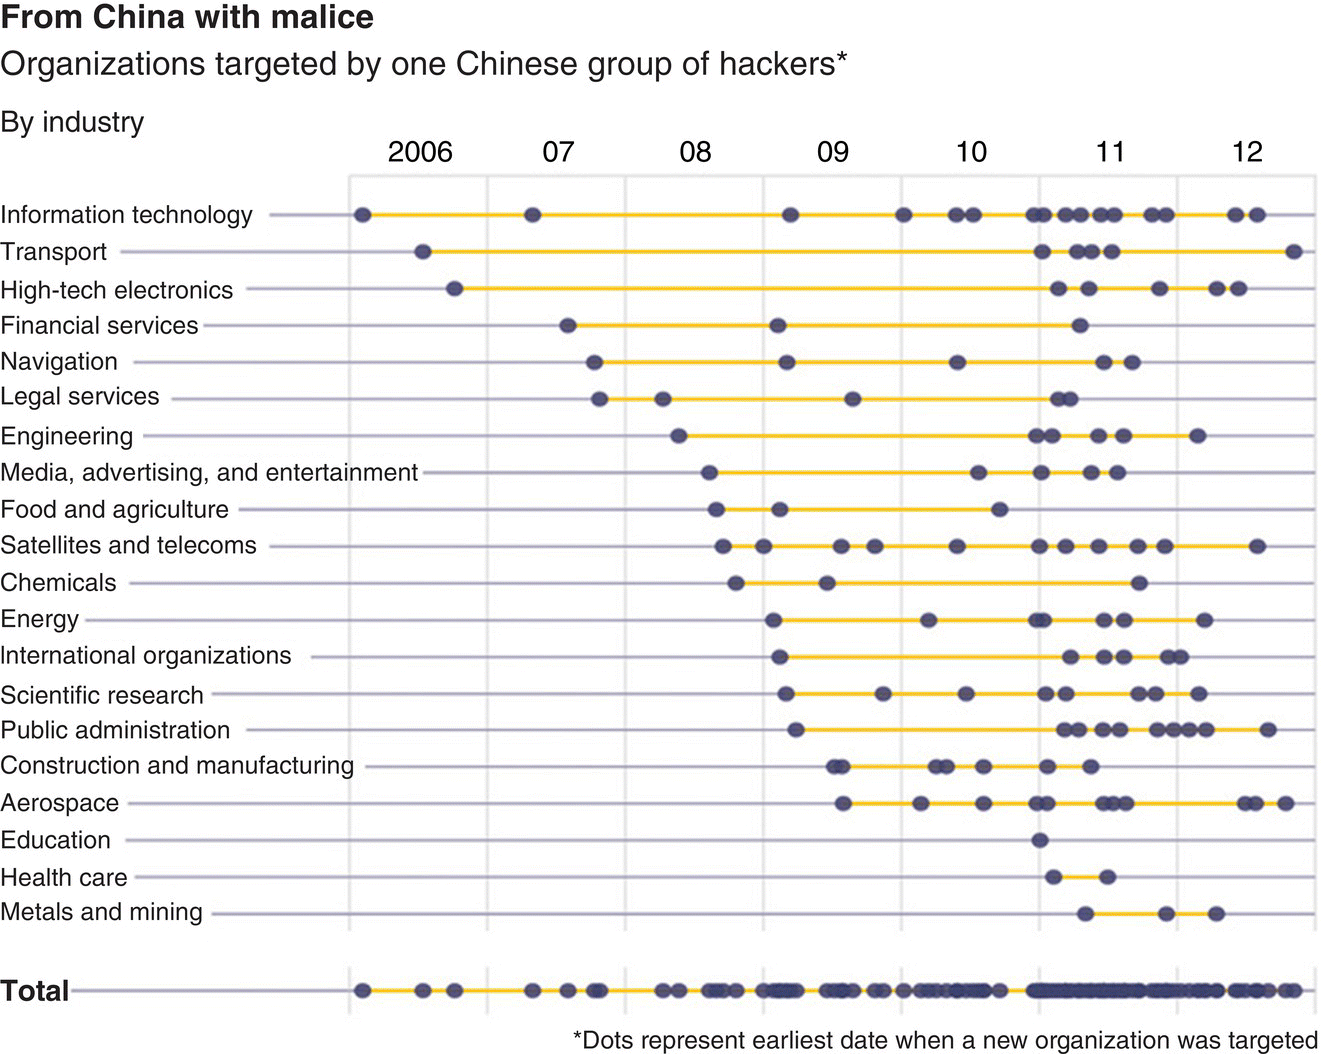 A chart with lines and dots indicating the organizations targeted by China from 2006 to 2012, including information technology, transport, high-tech electronics, financial services, and navigation.